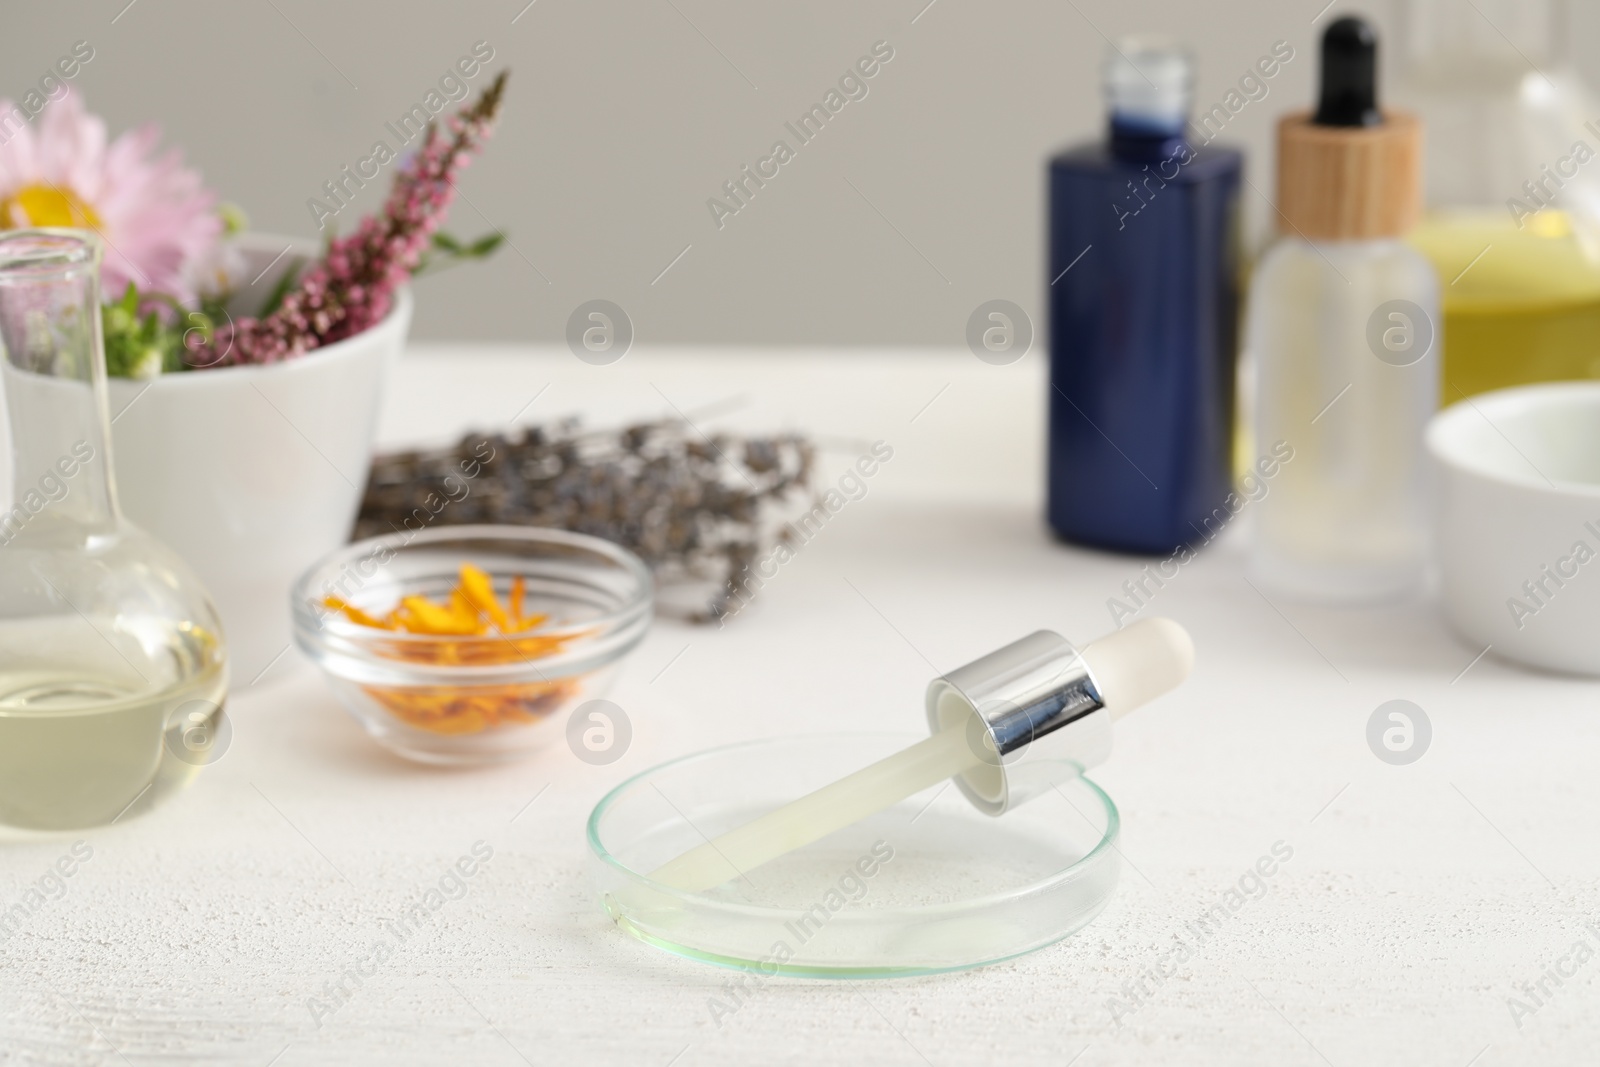 Photo of Developing cosmetic oil. Petri dish with dropper on white table in laboratory